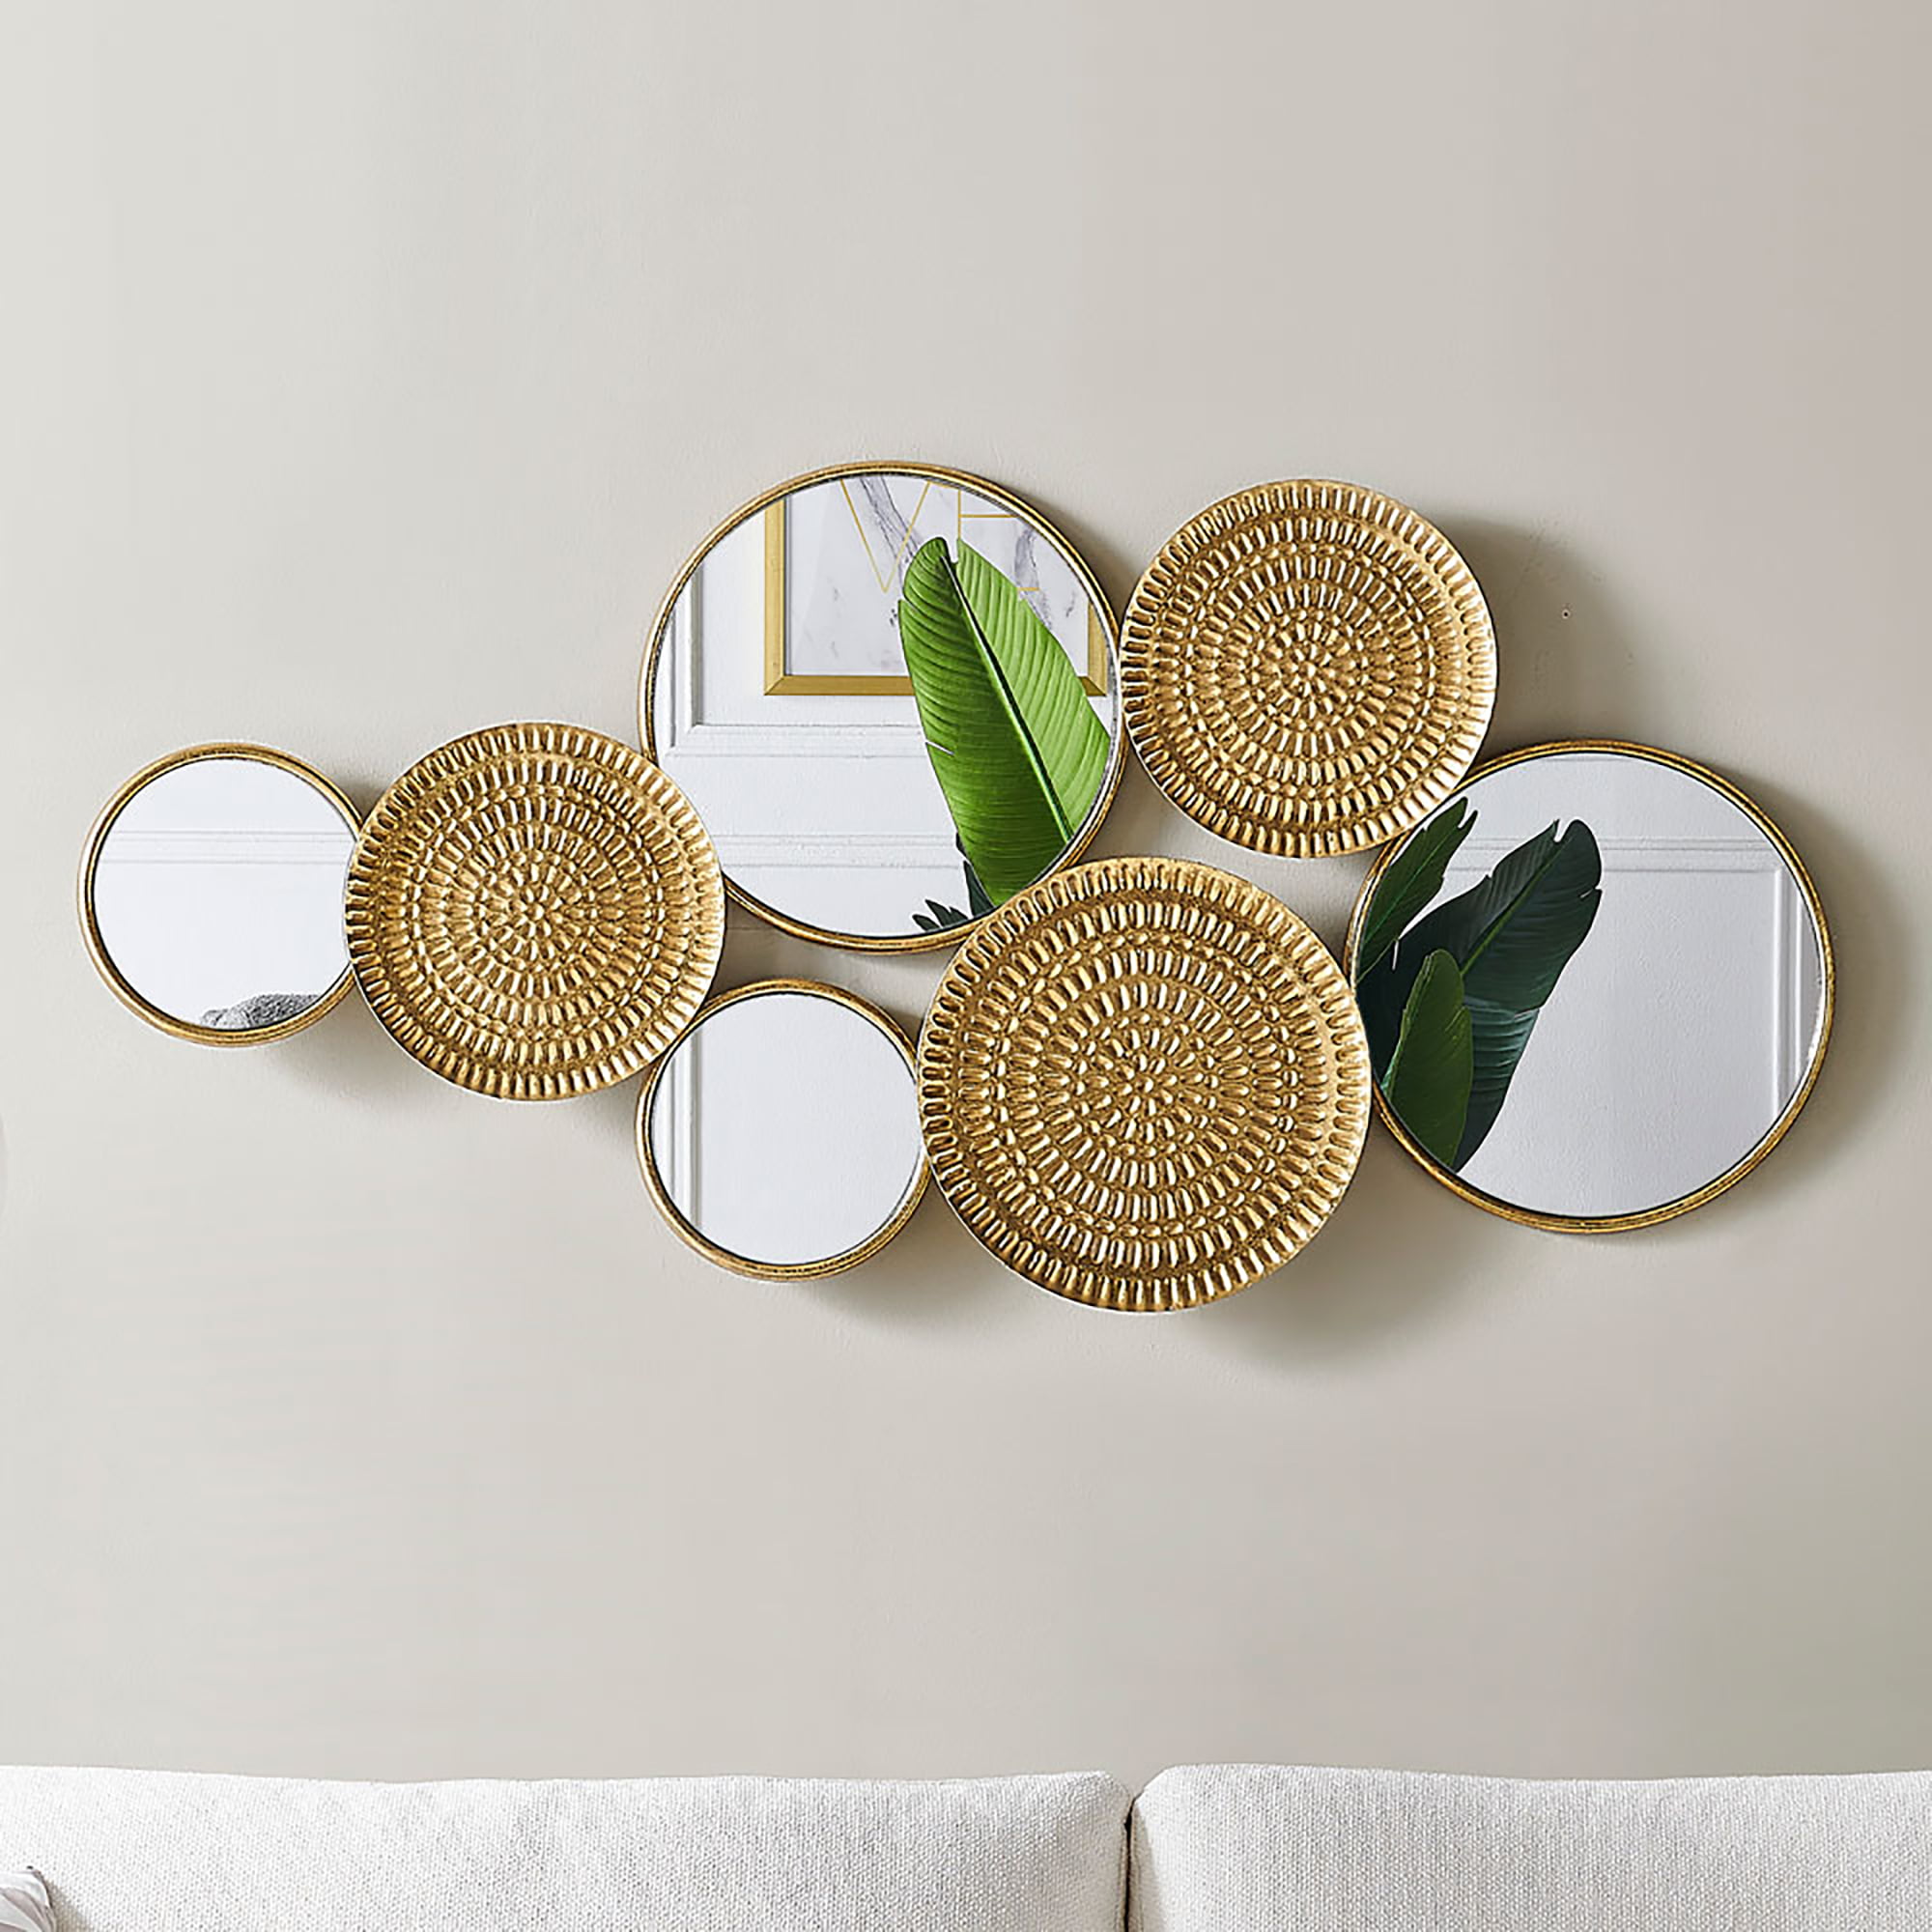 Home Decor Metal Wall Decor with Multi Circle Plates Mirror, Large